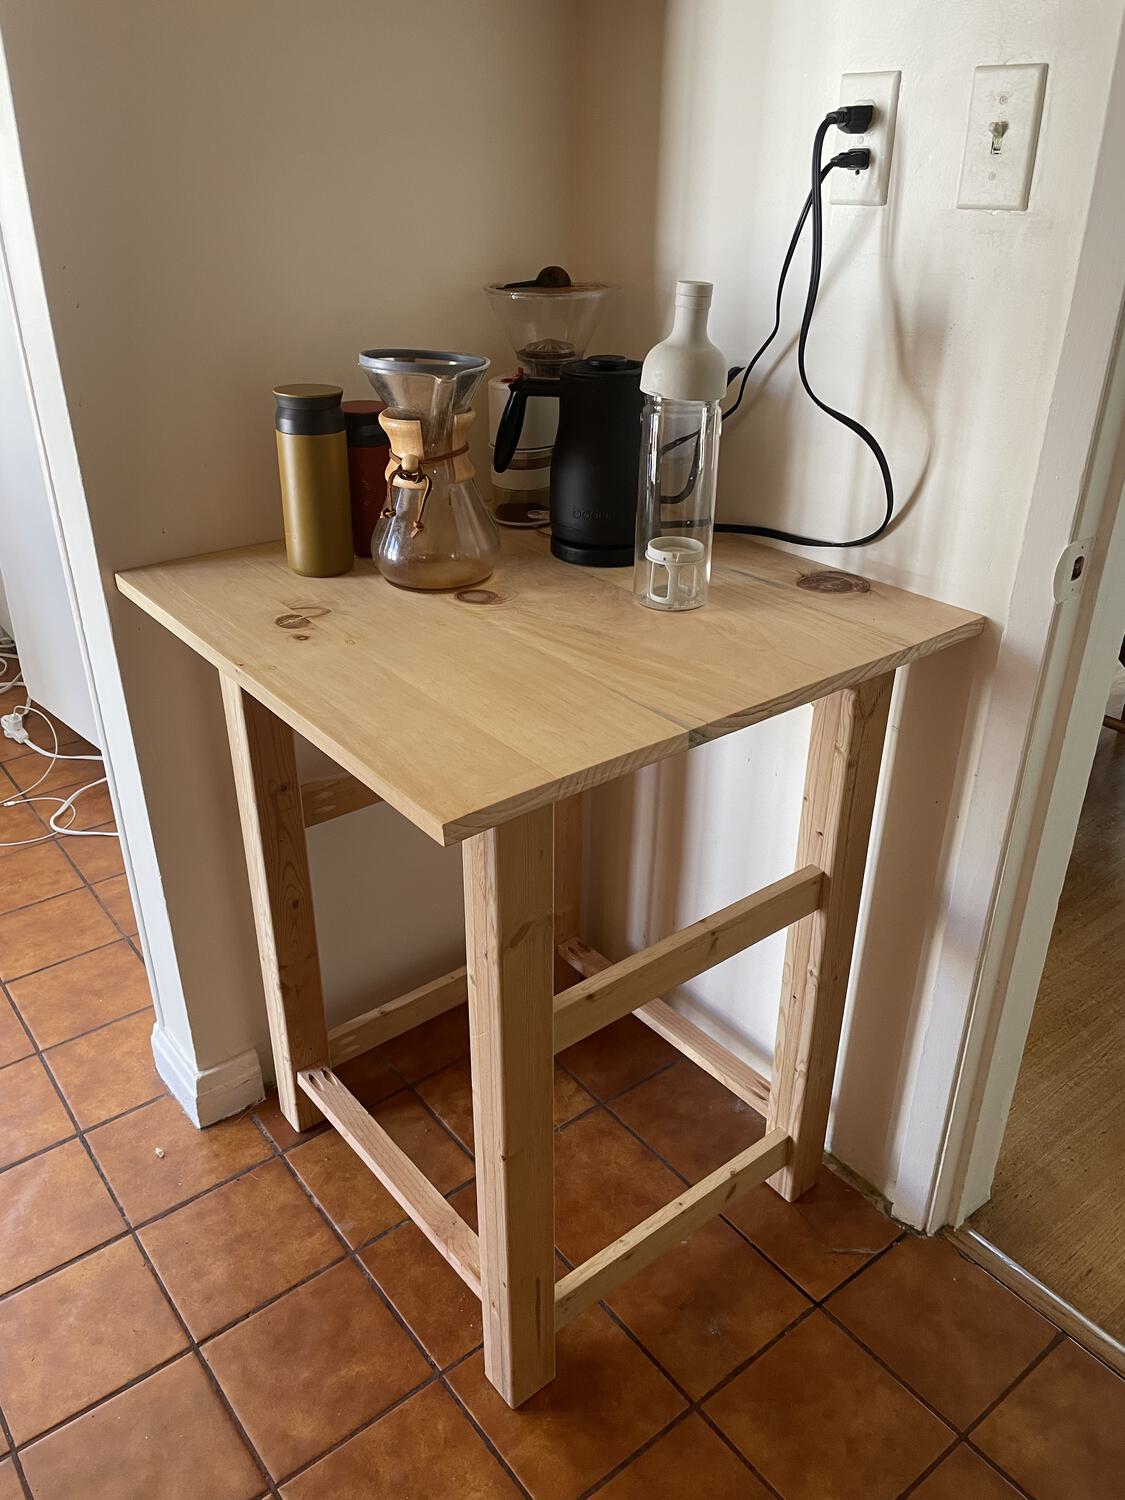 A simple wooden table with coffee accessories atop it